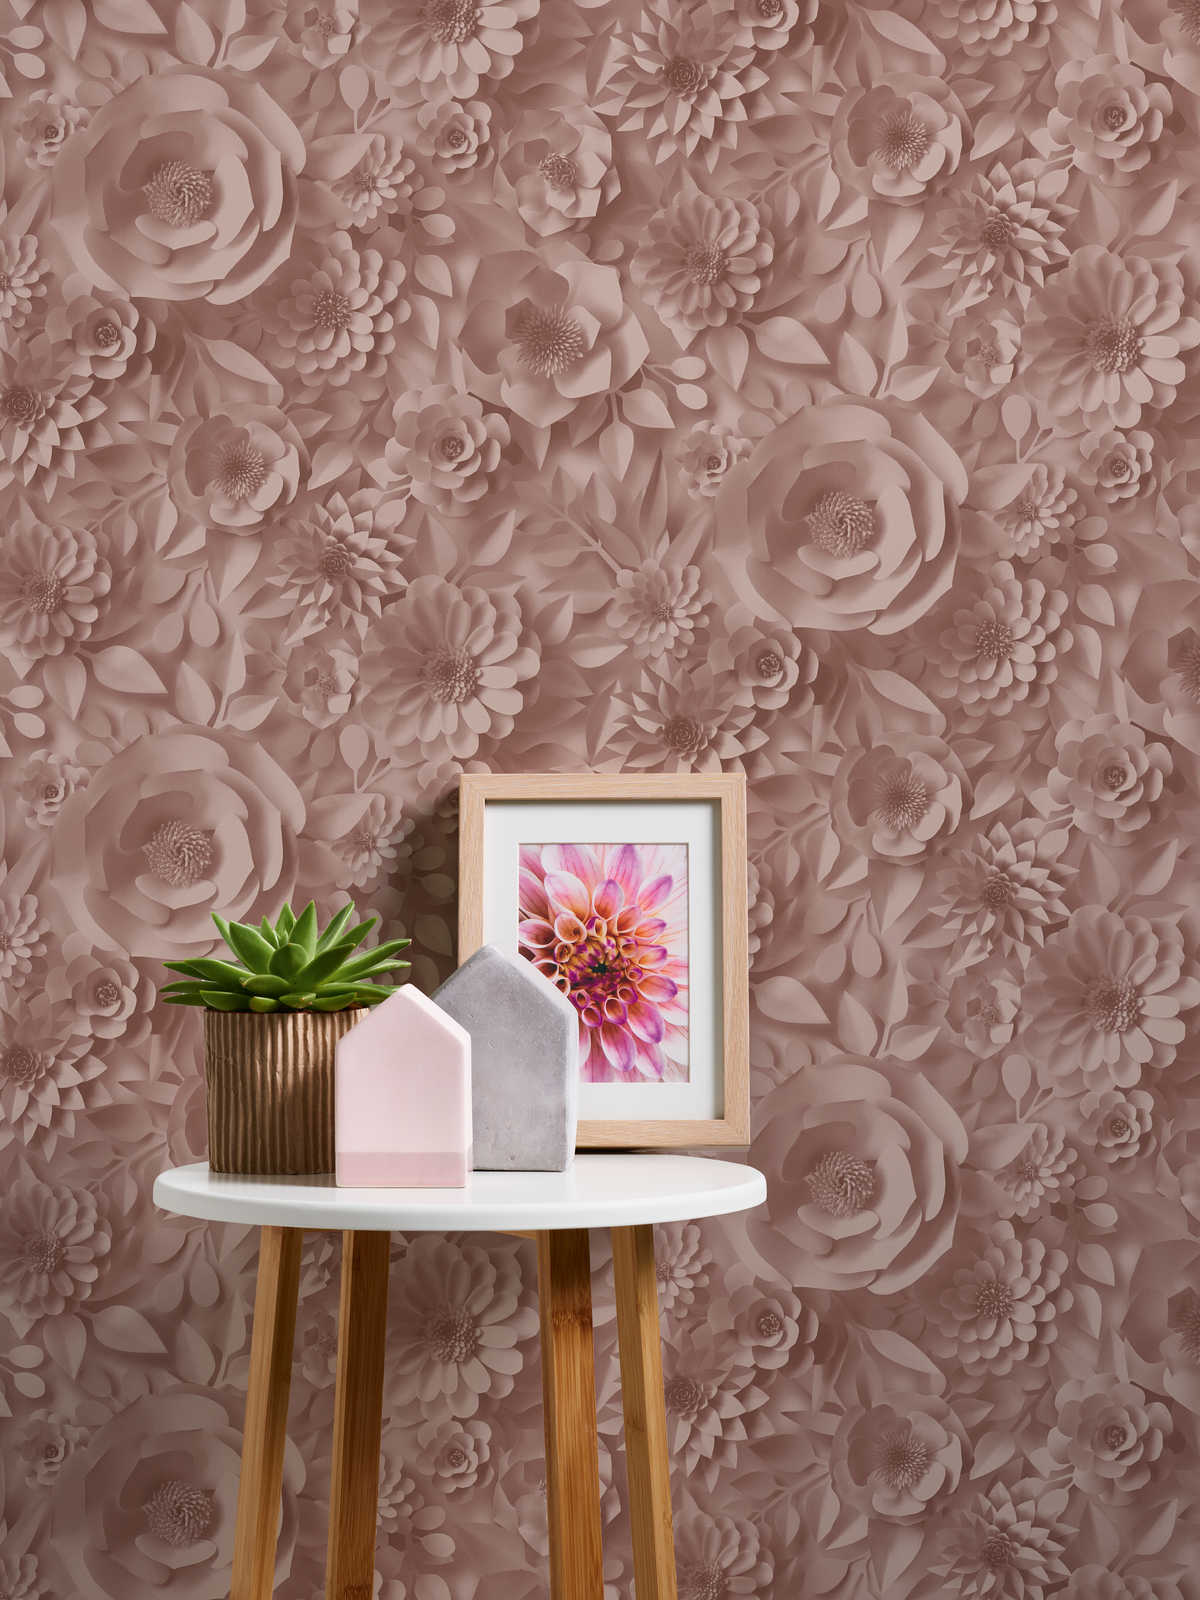             3D wallpaper with paper flowers, graphic floral pattern - pink
        